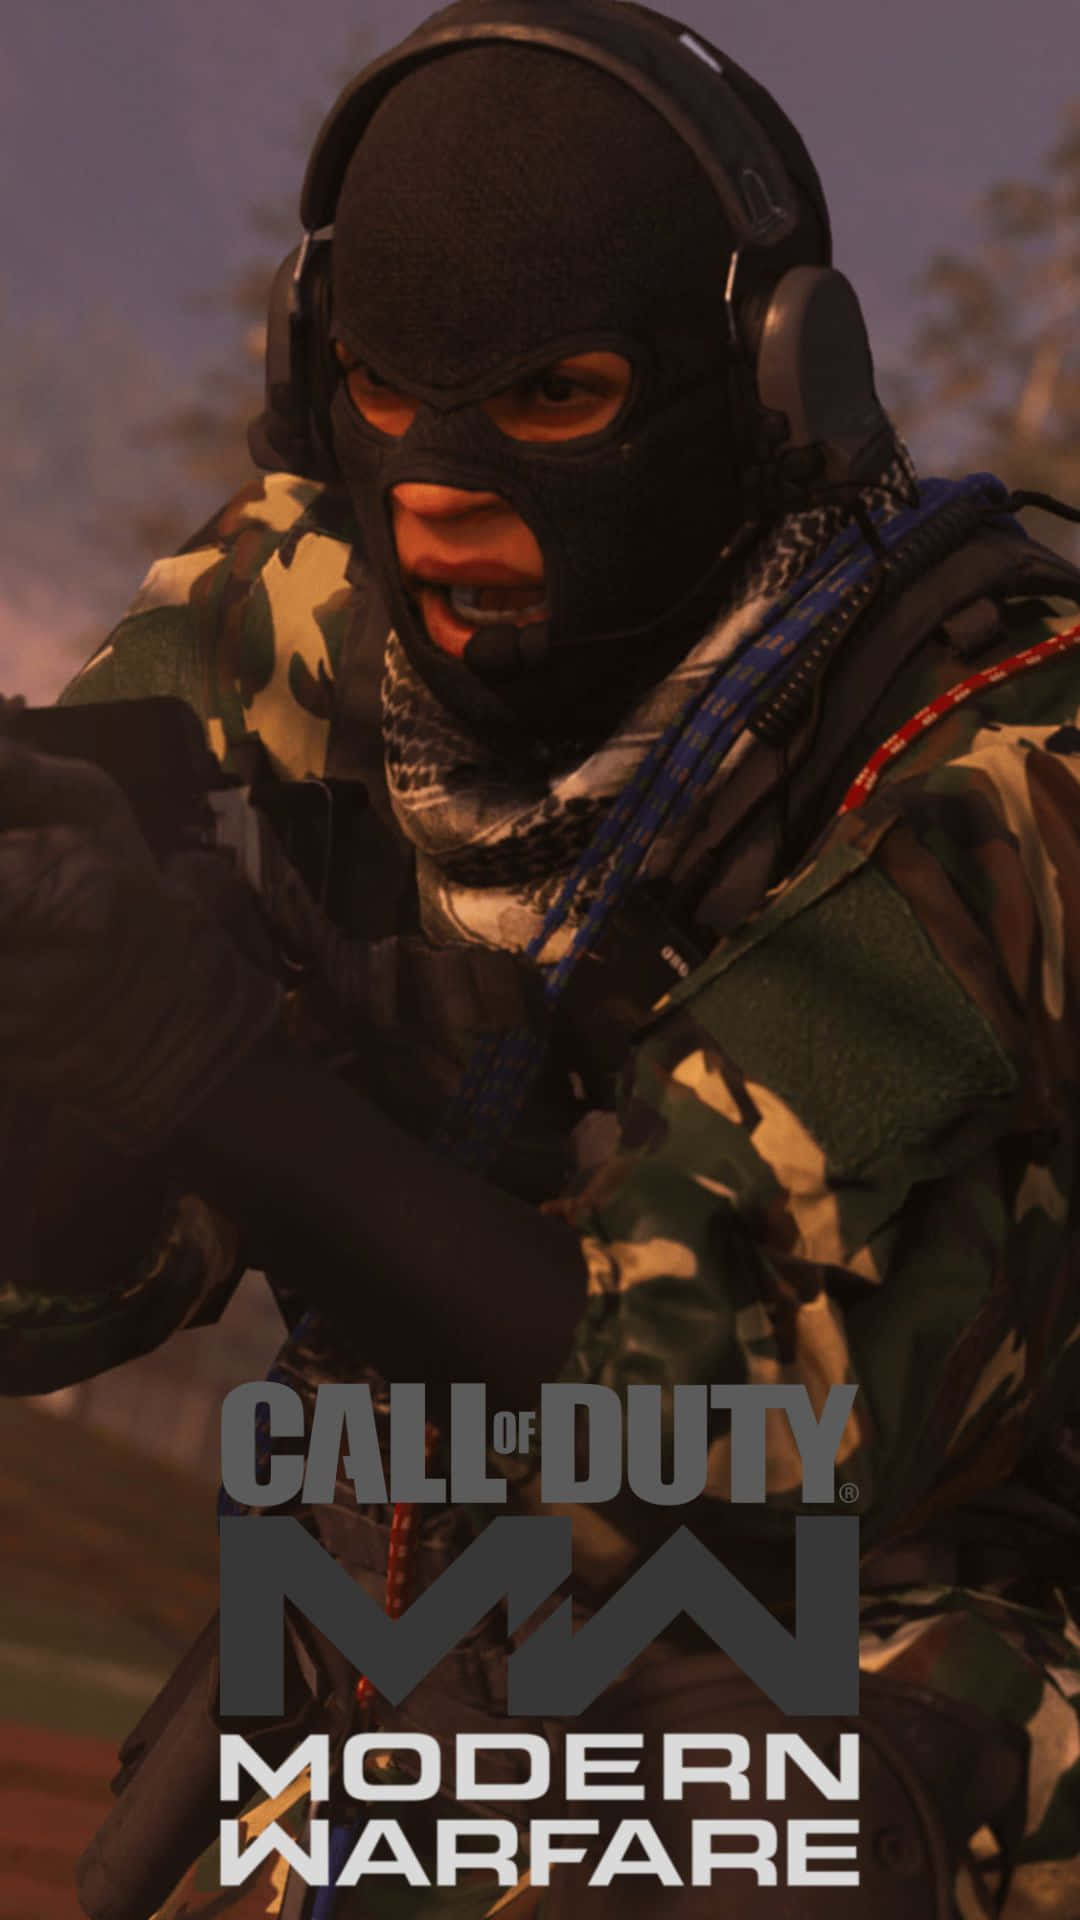 Dive into the dynamic world of Android's Call of Duty Modern Warfare